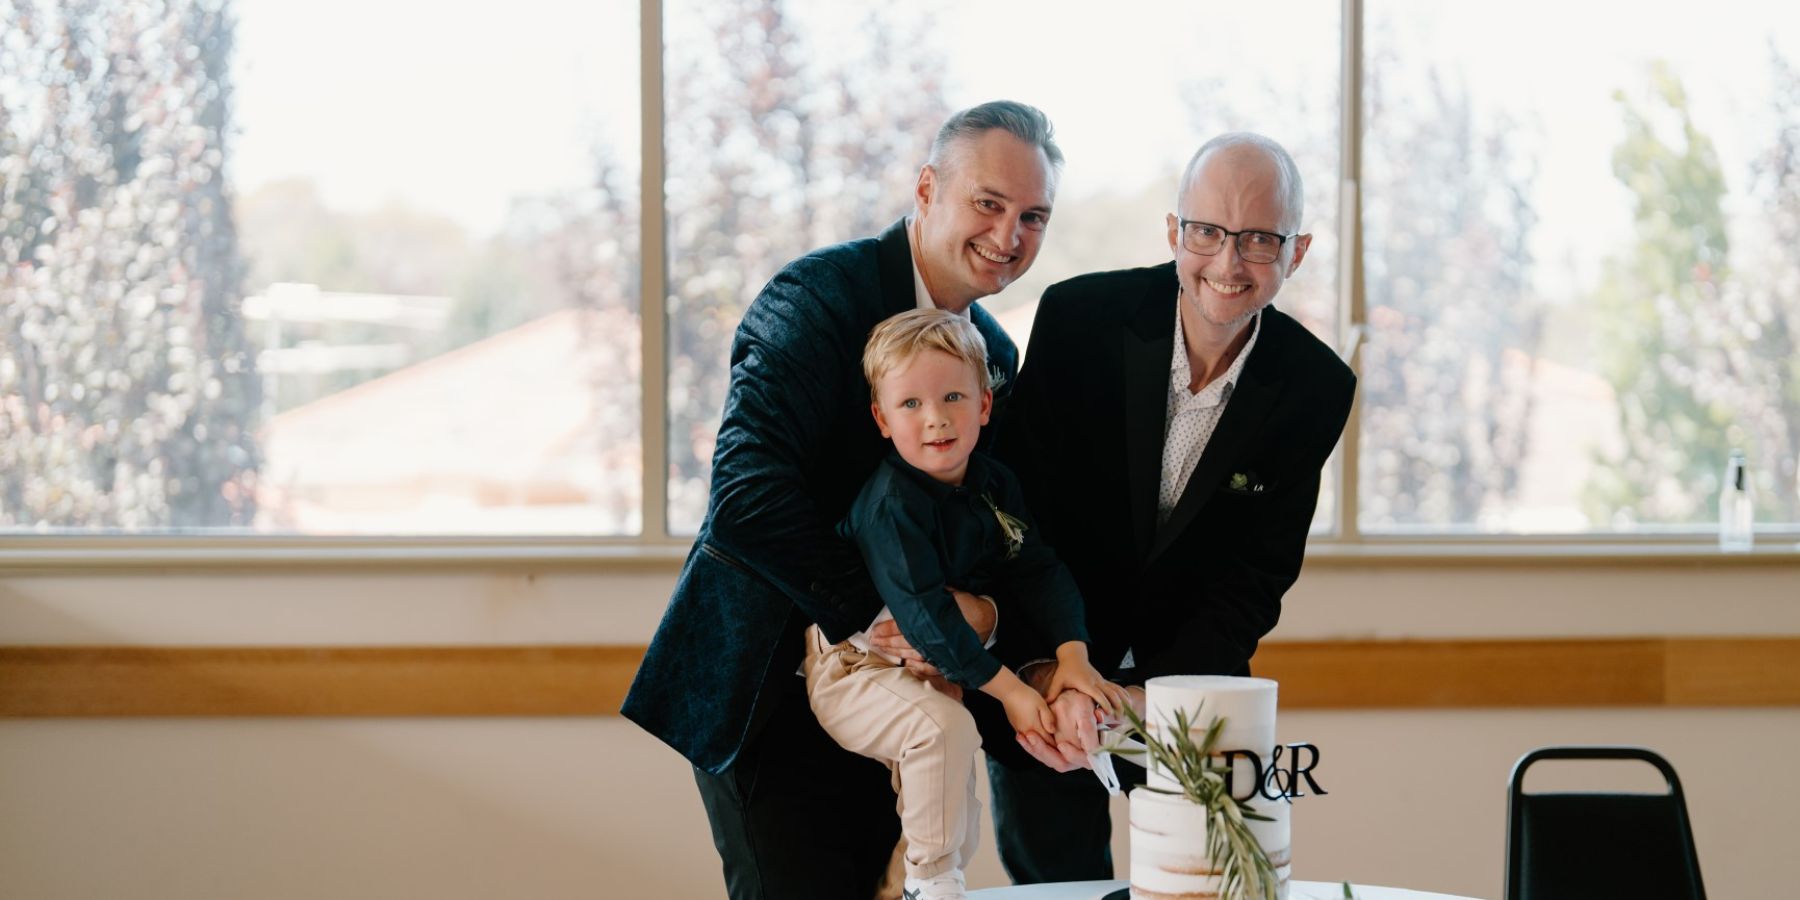 Picture of Dale and Rhys cutting the wedding cake with their son